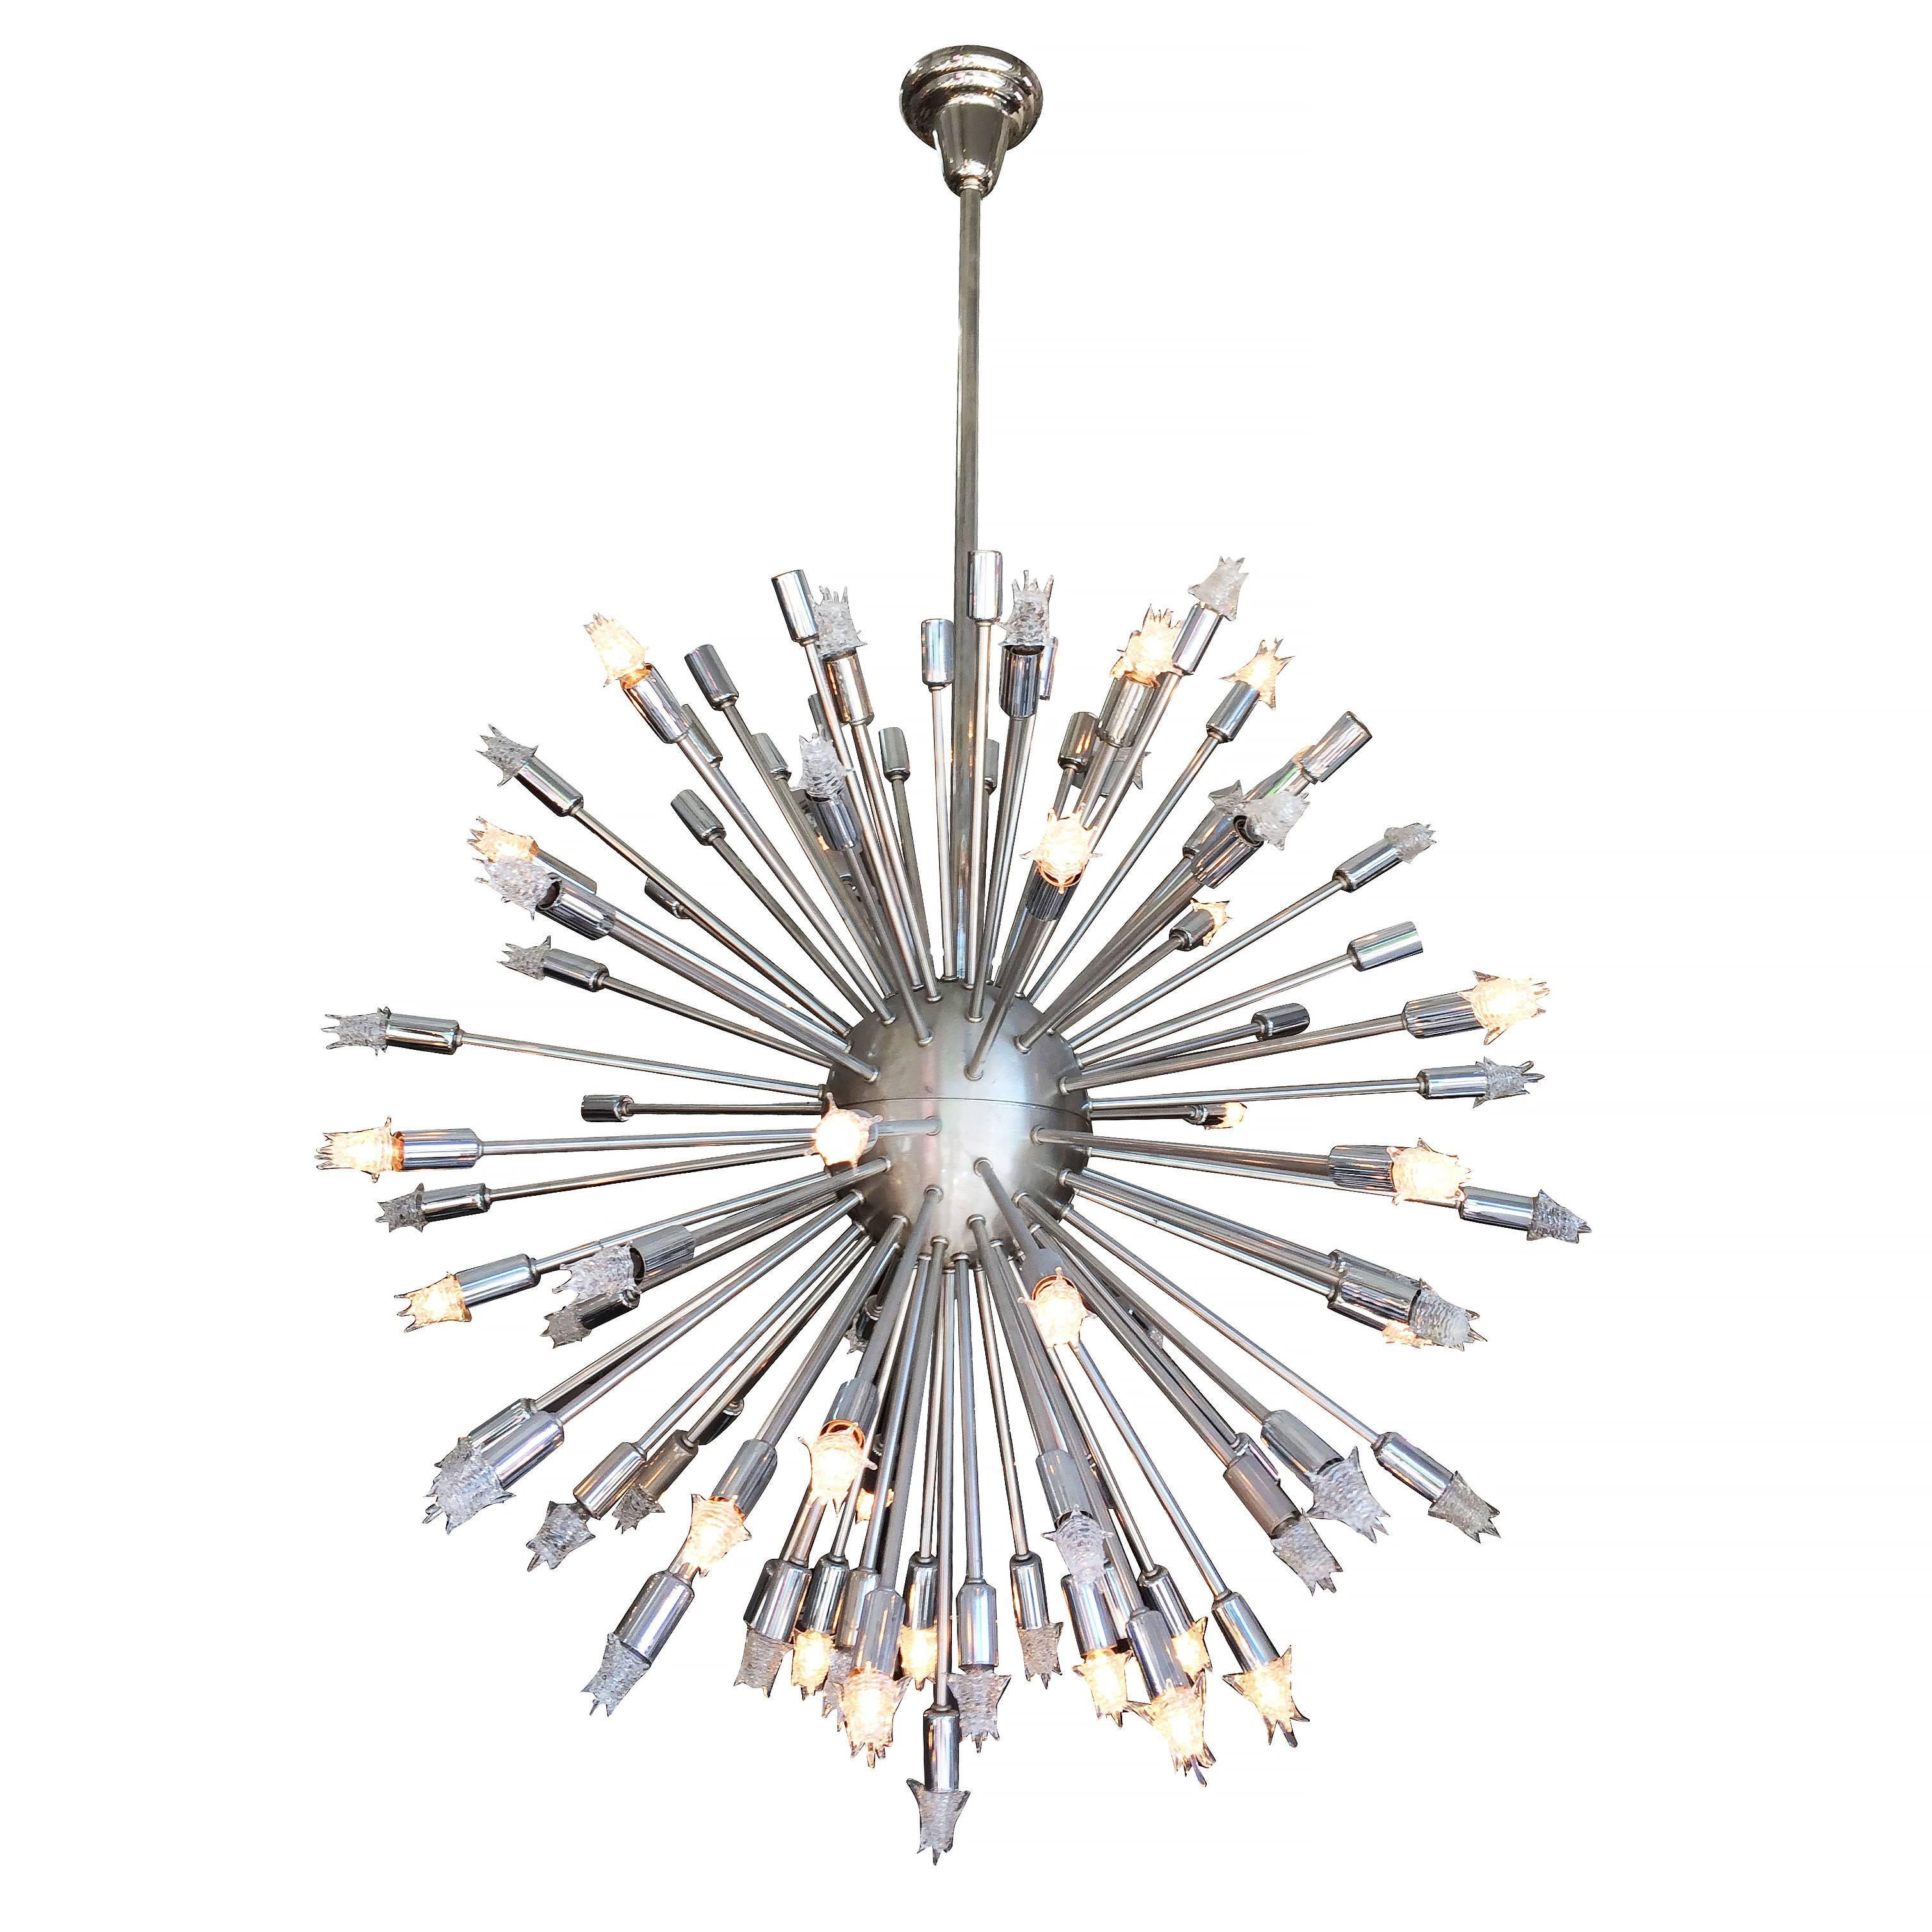 Mid-Century Modern style Sputnik chandelier consisting of 101 chrome rods that extends from its brushed steel center point with each chrome rod having its own light socket. Measures: Large 34